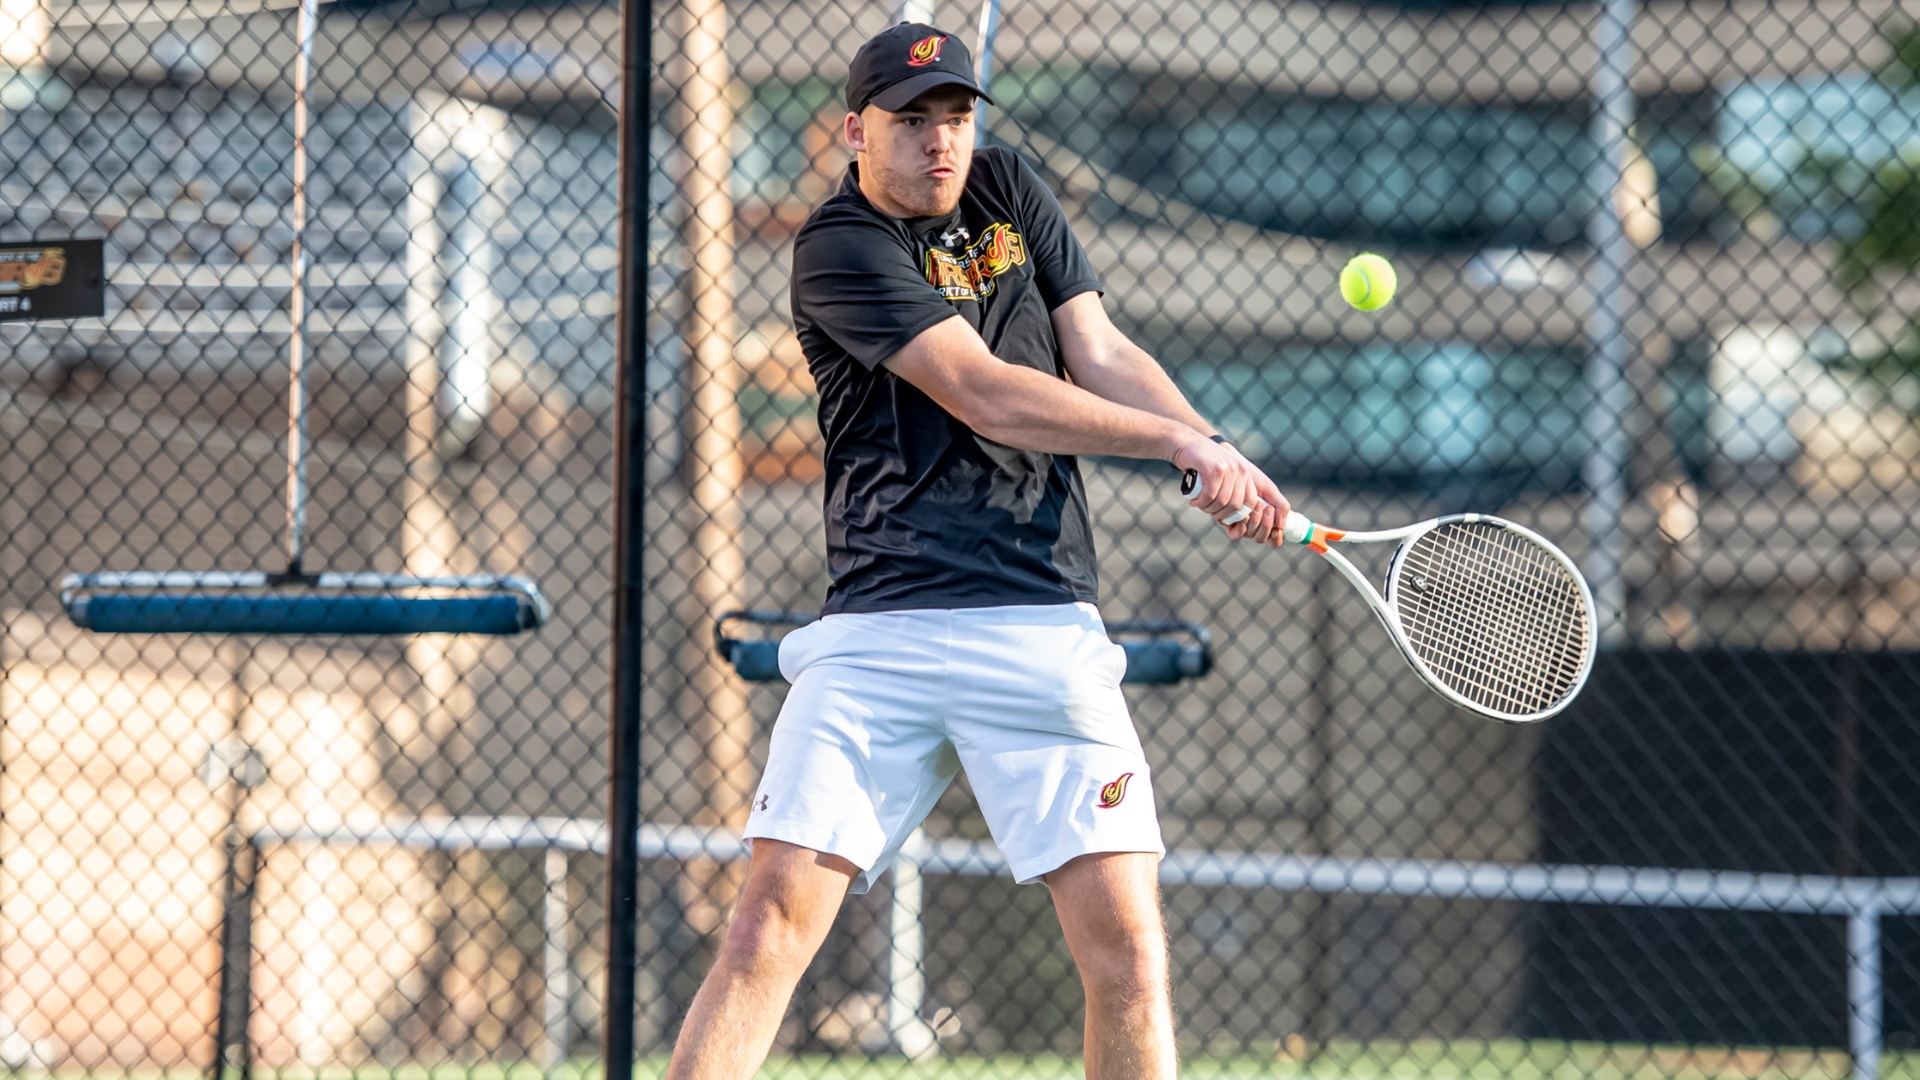 Bedforth went 2-0 on the day, winning at No.2 doubles and earning his first singles win of the season at No.6